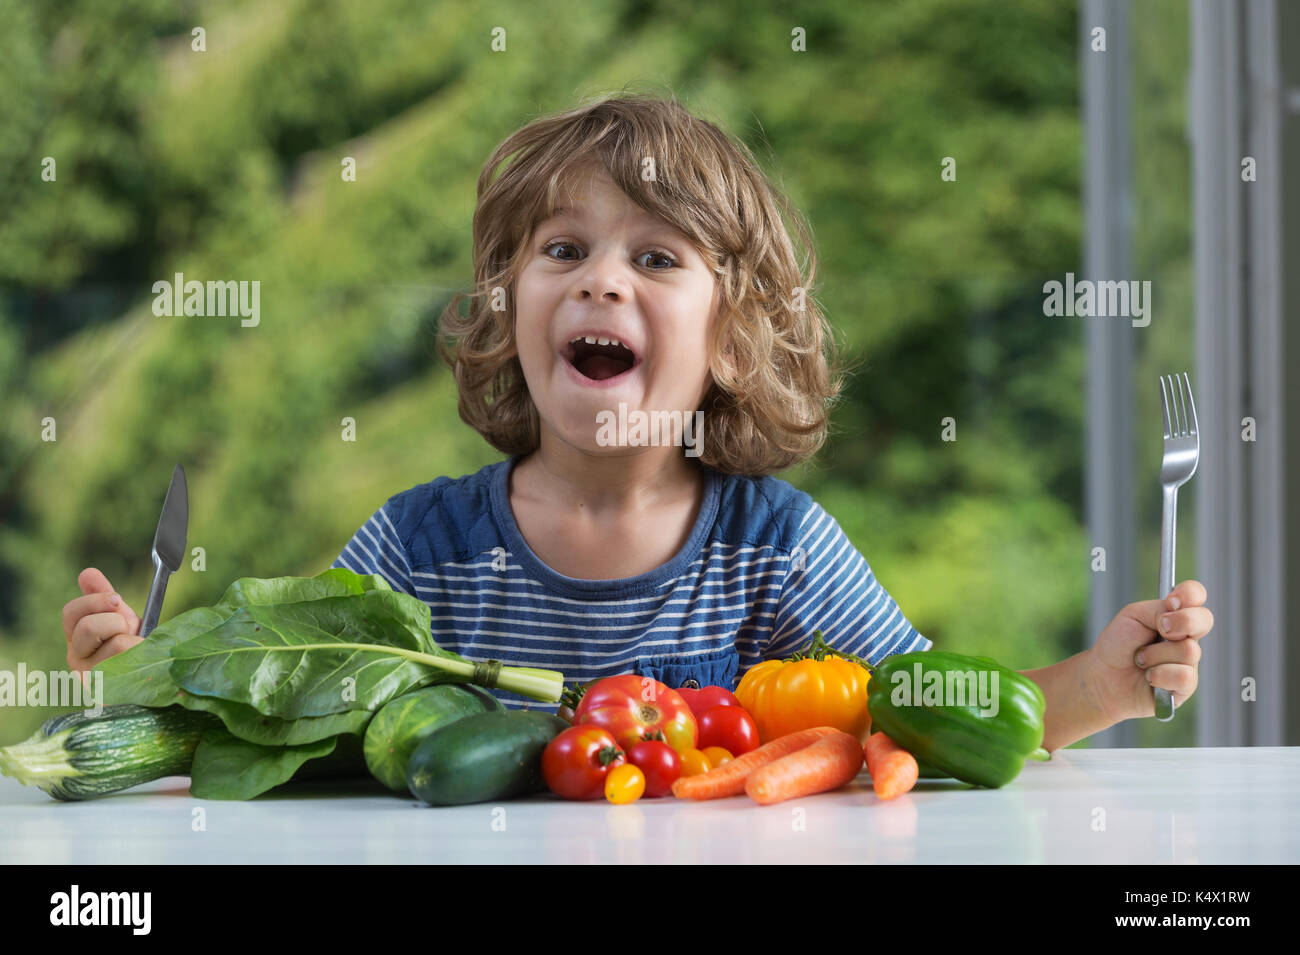 Cute little boy sitting at the table excited about vegetable meal, bad or good eating habits, nutrition and healthy eating, showing emotions concept Stock Photo